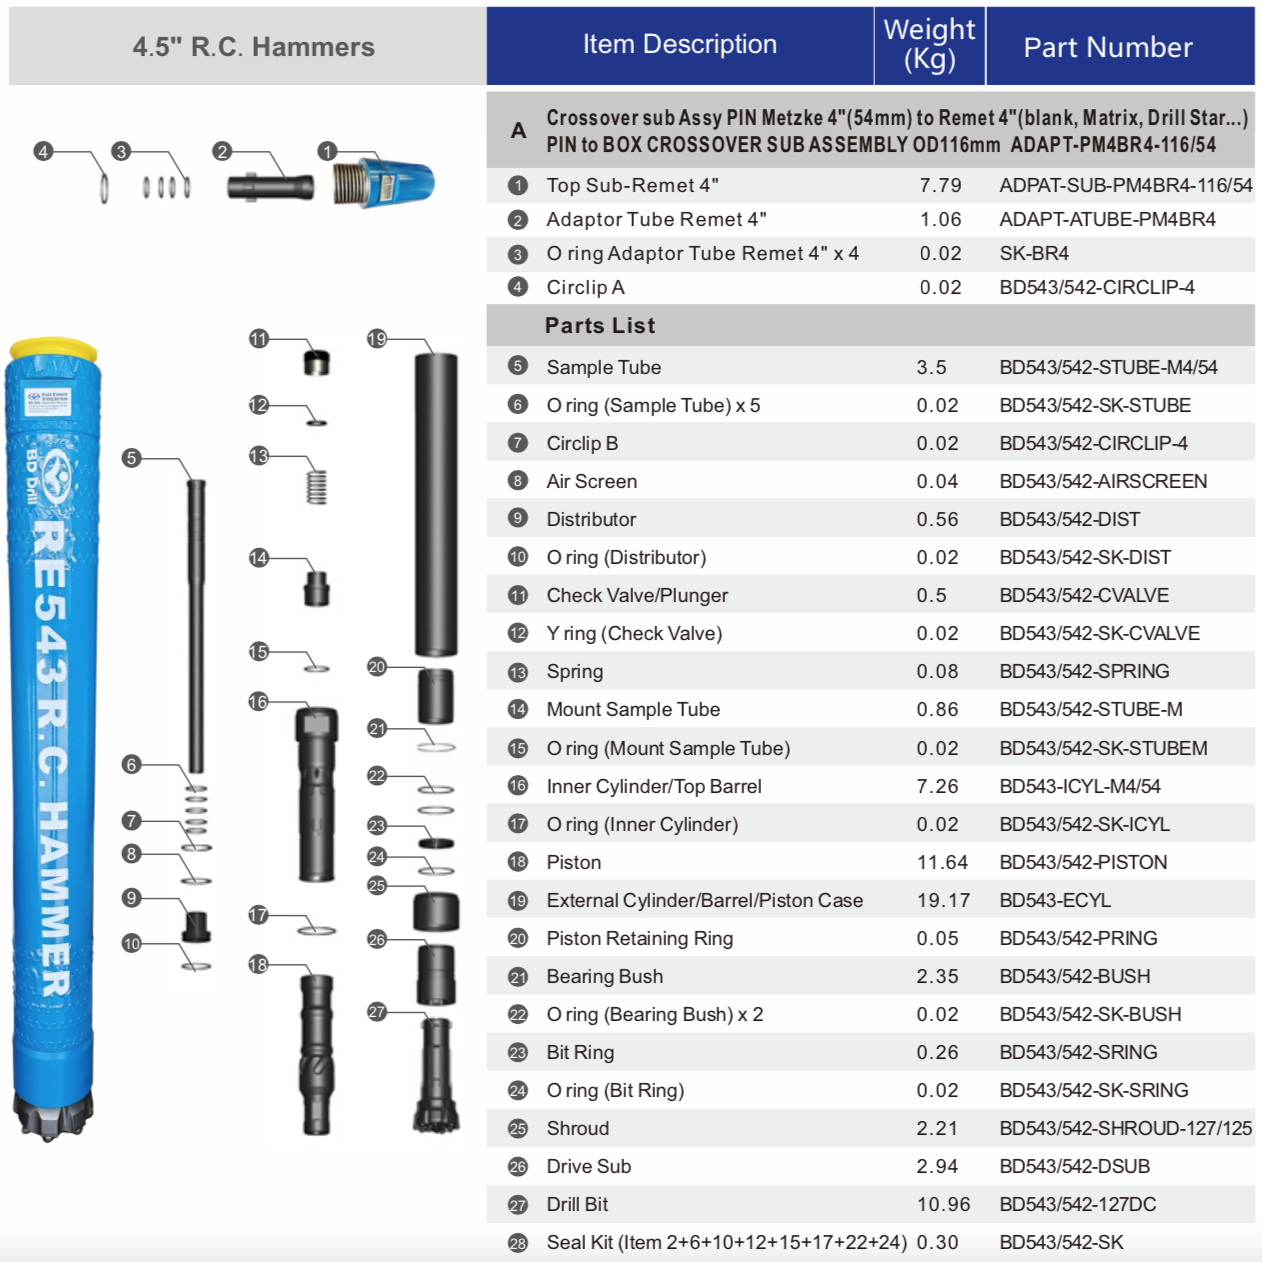 BD543 DTH Hammer specifications and parts list